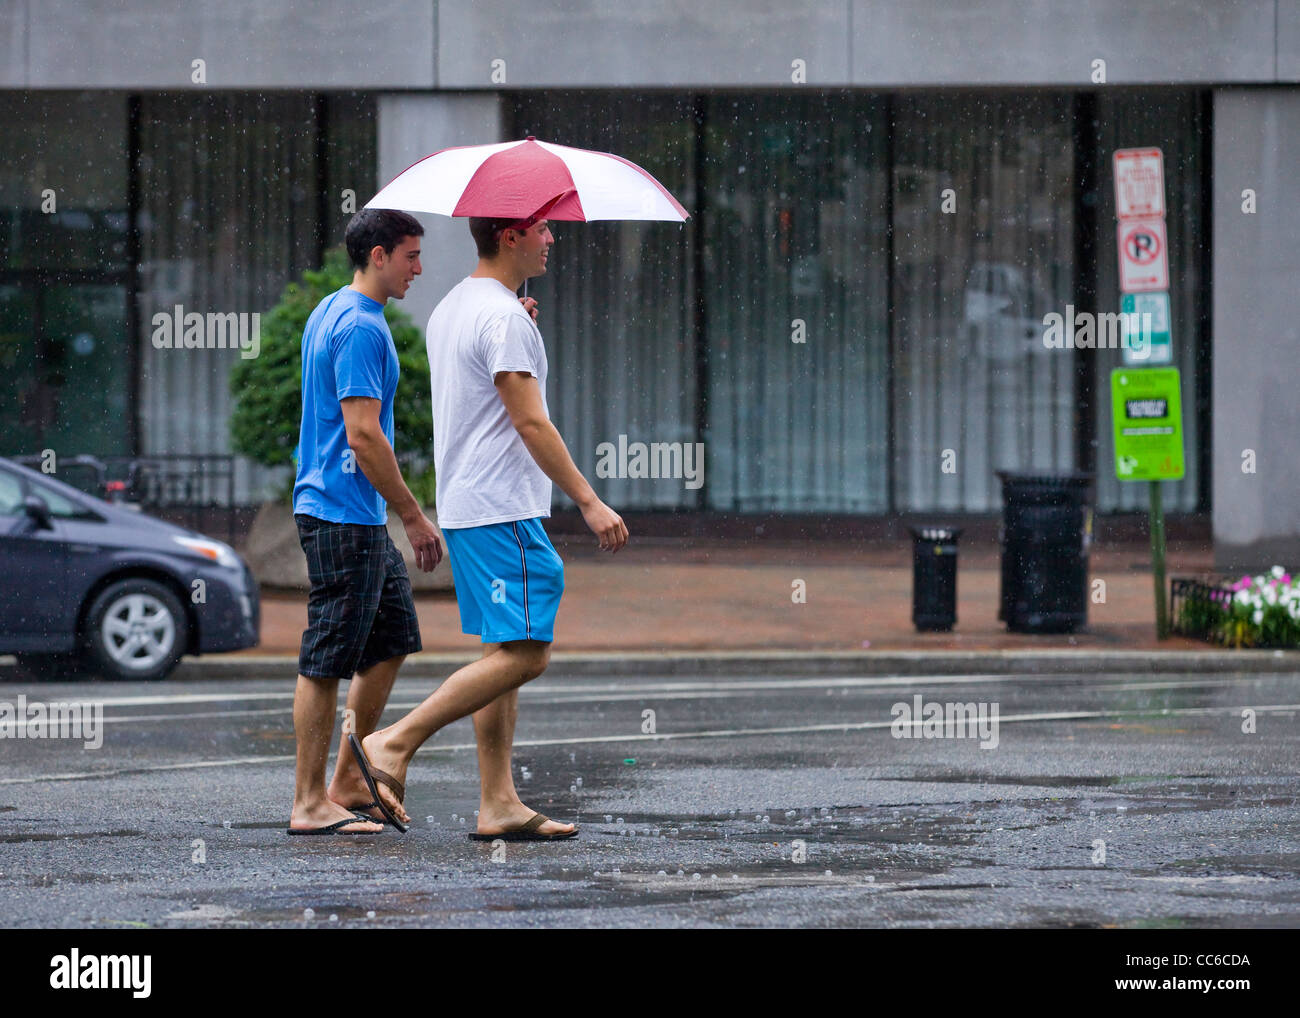 Young men crossing the street holding an umbrella on a rainy day Stock Photo